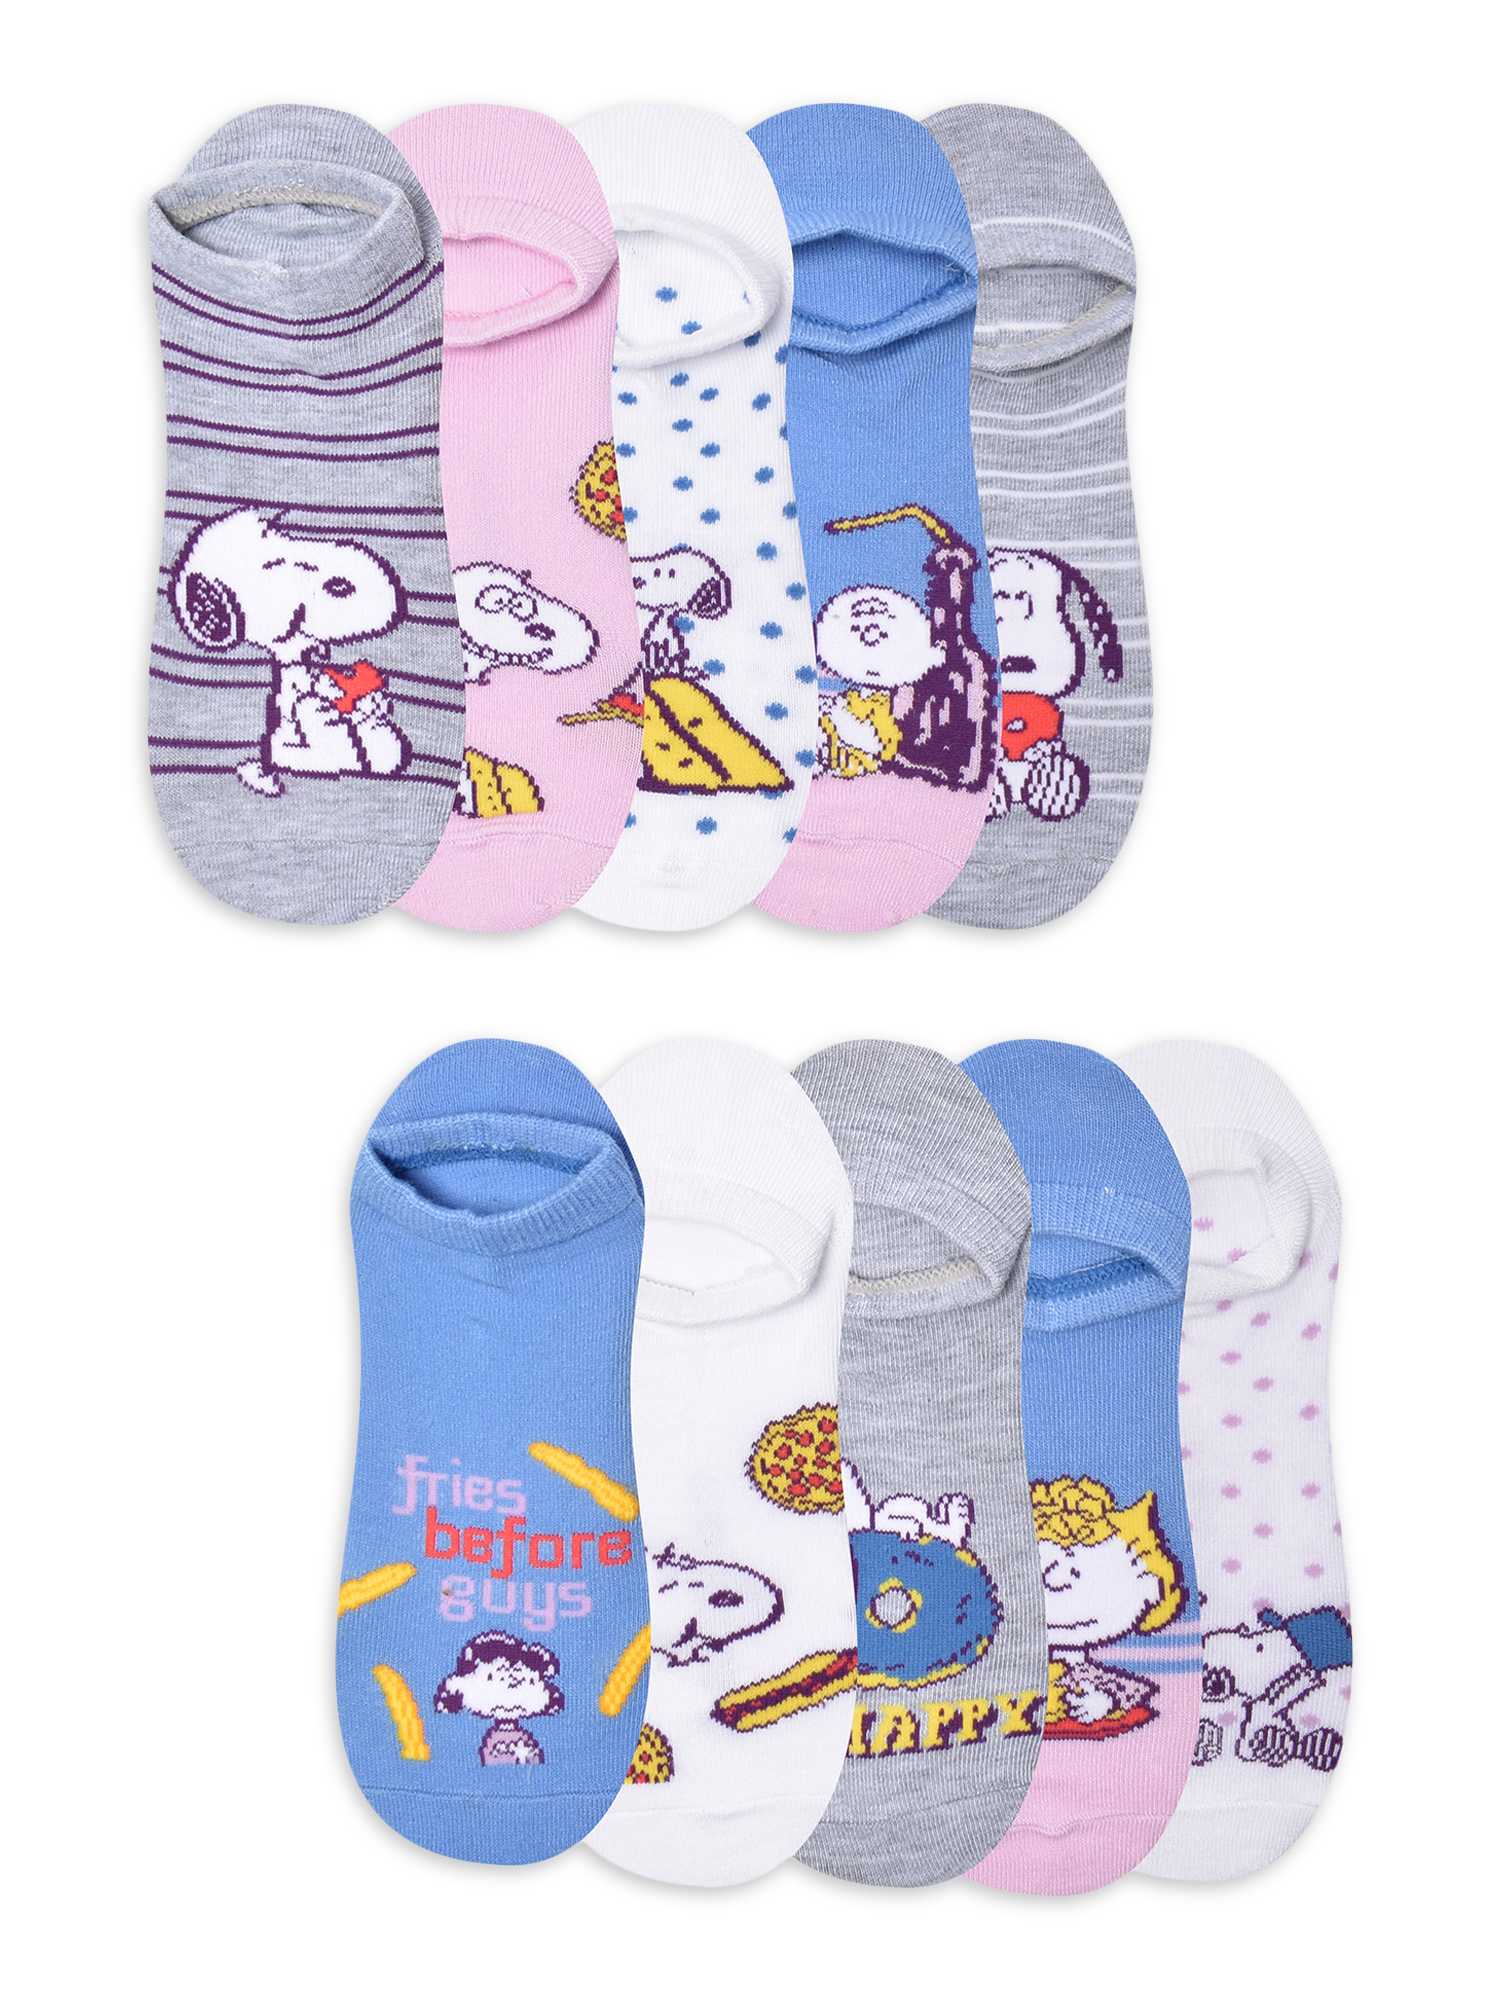 Peanuts Womens Graphic Super No Show Socks, 10-Pack, Sizes 4-10 - image 1 of 5